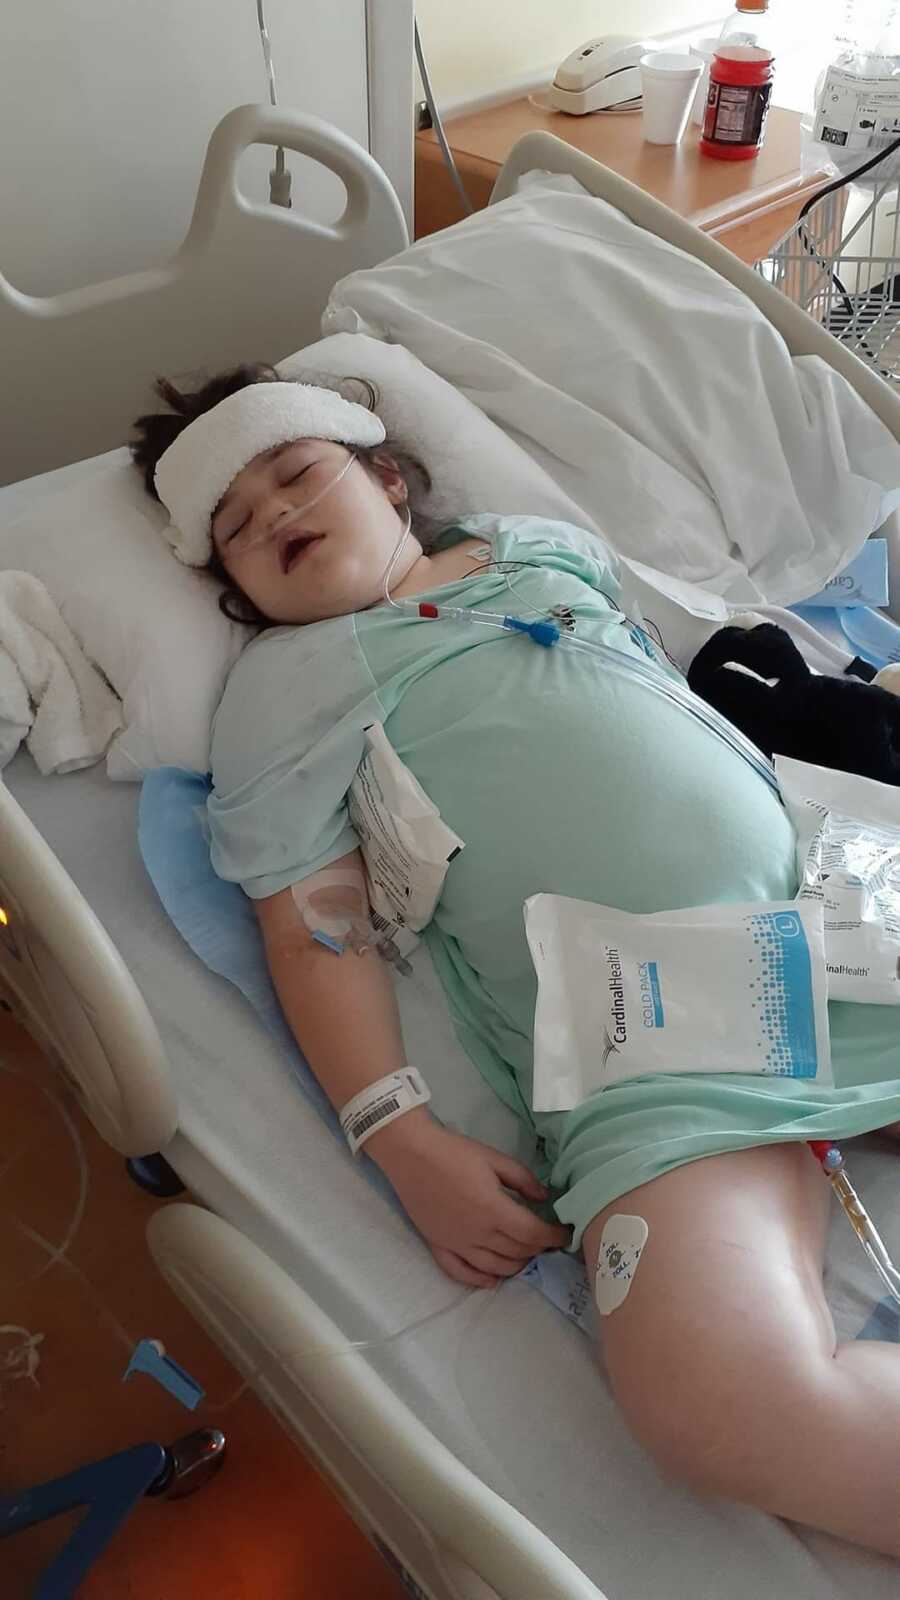 Girl lying in hospital bed with ice packs on stomach